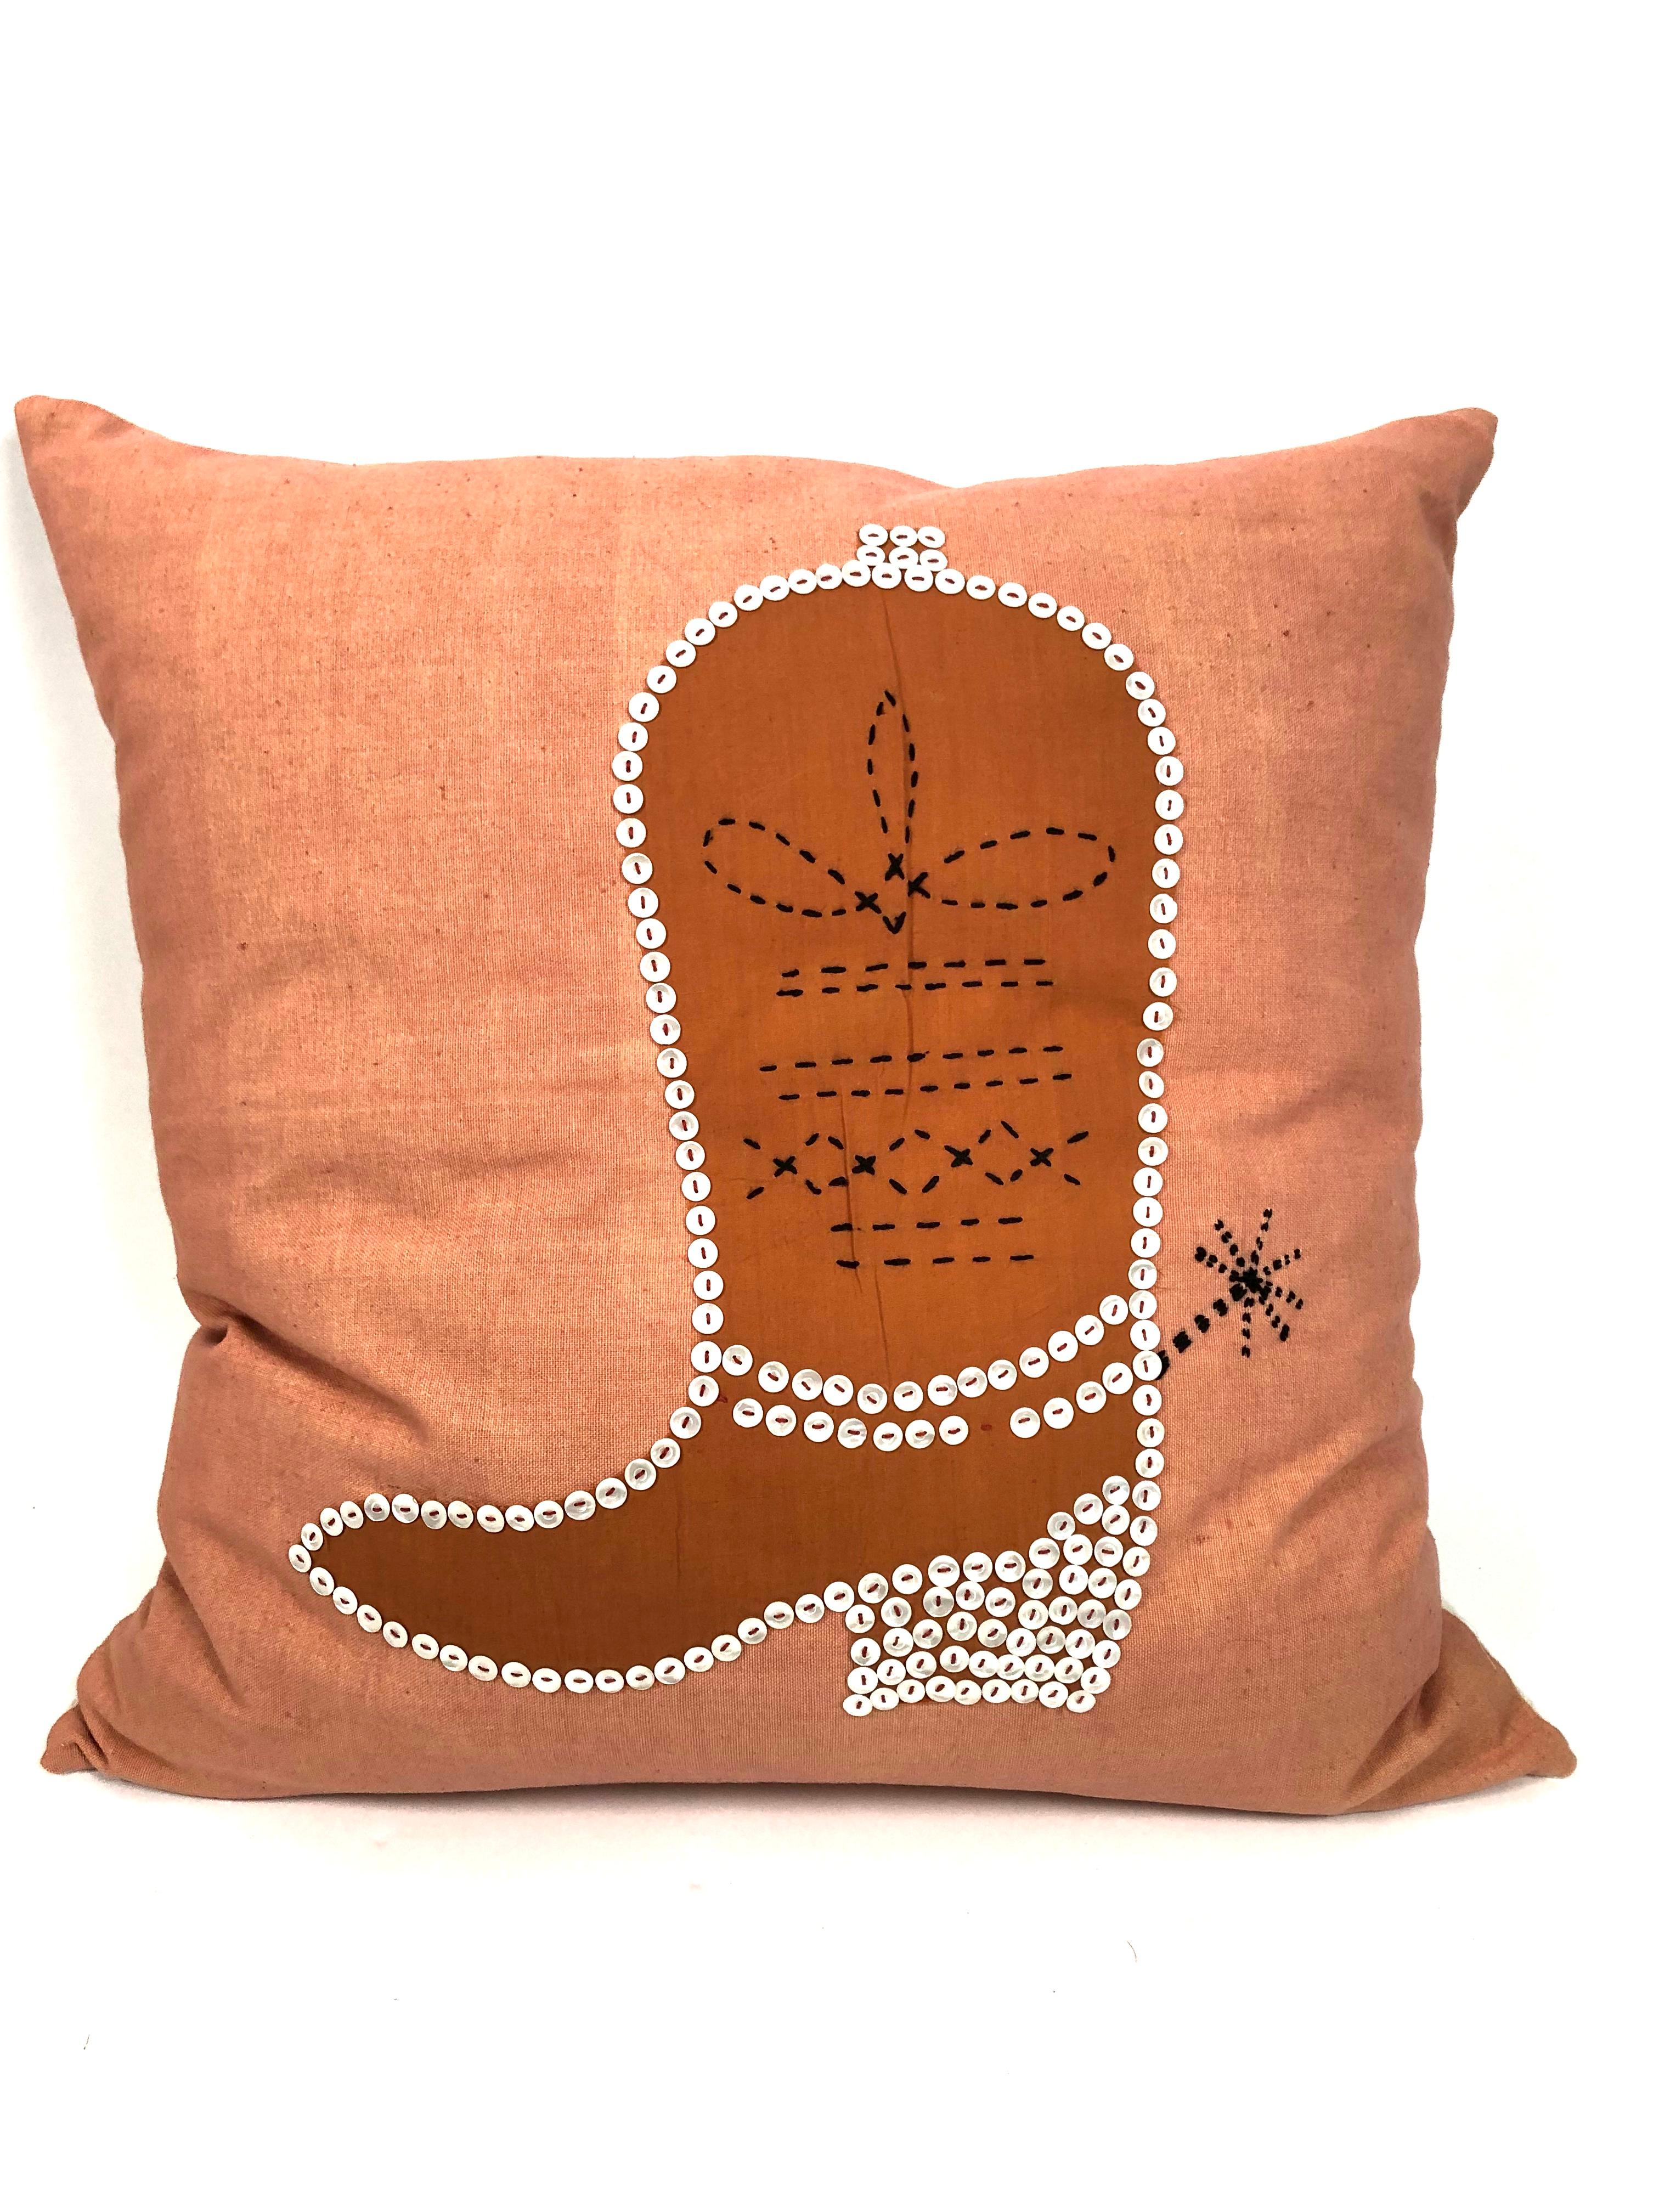 Handmade, one of a kind vintage pillows, with an appliqued burnt orange or rust colored cotton cowboy boot with spur, highlighted and decorated with black decorative embroidery and buttons, on a peach colored cotton field, with new down filling and